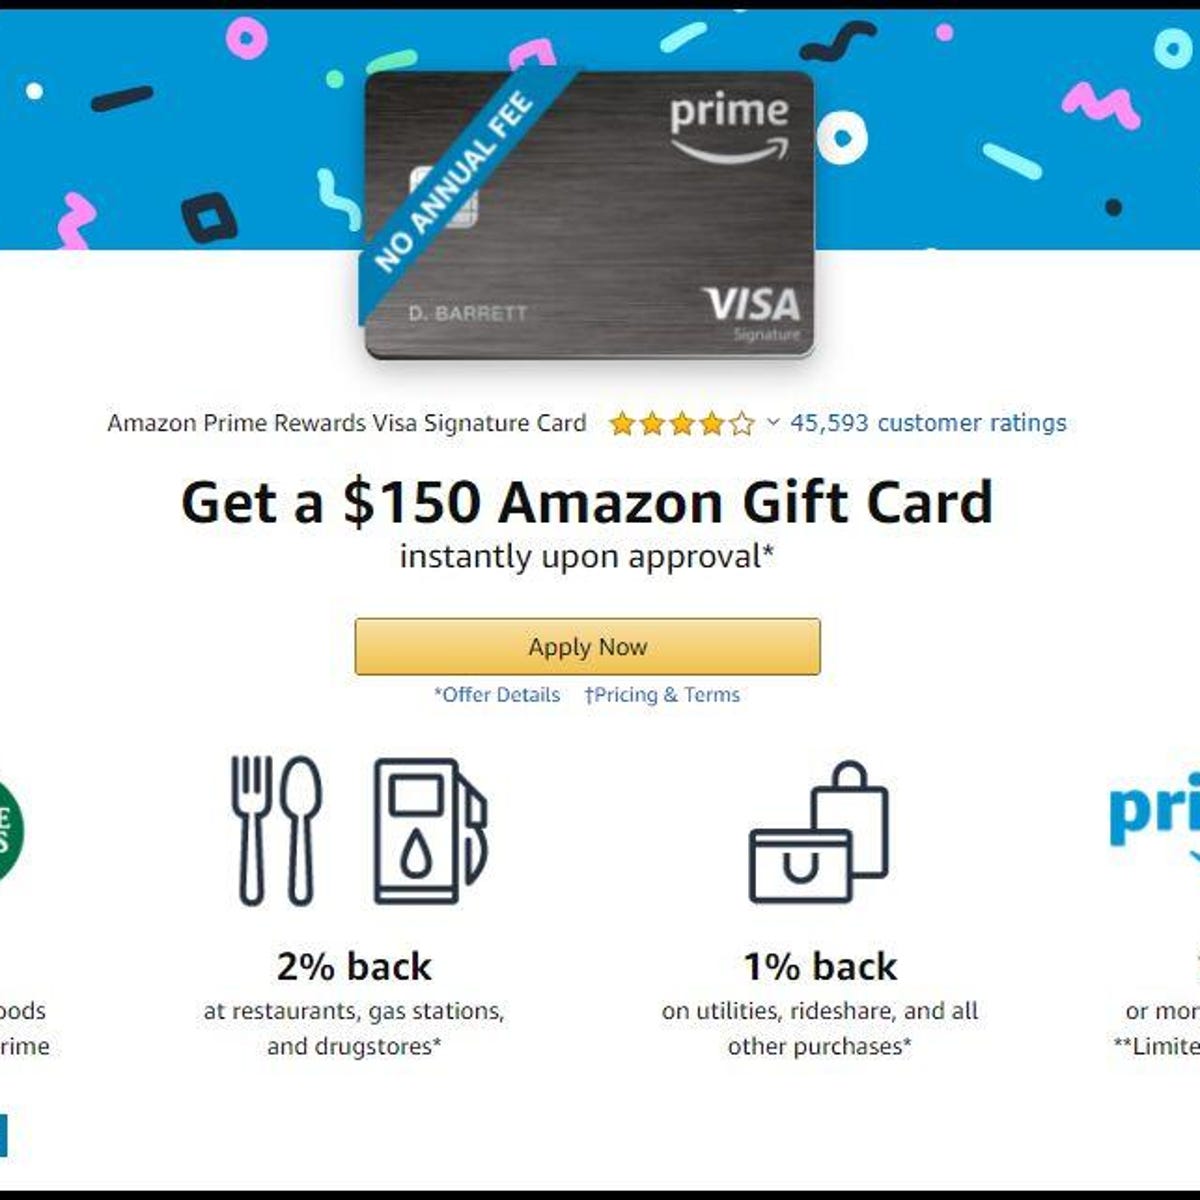 How to Get 150 Amazon Gift Card?